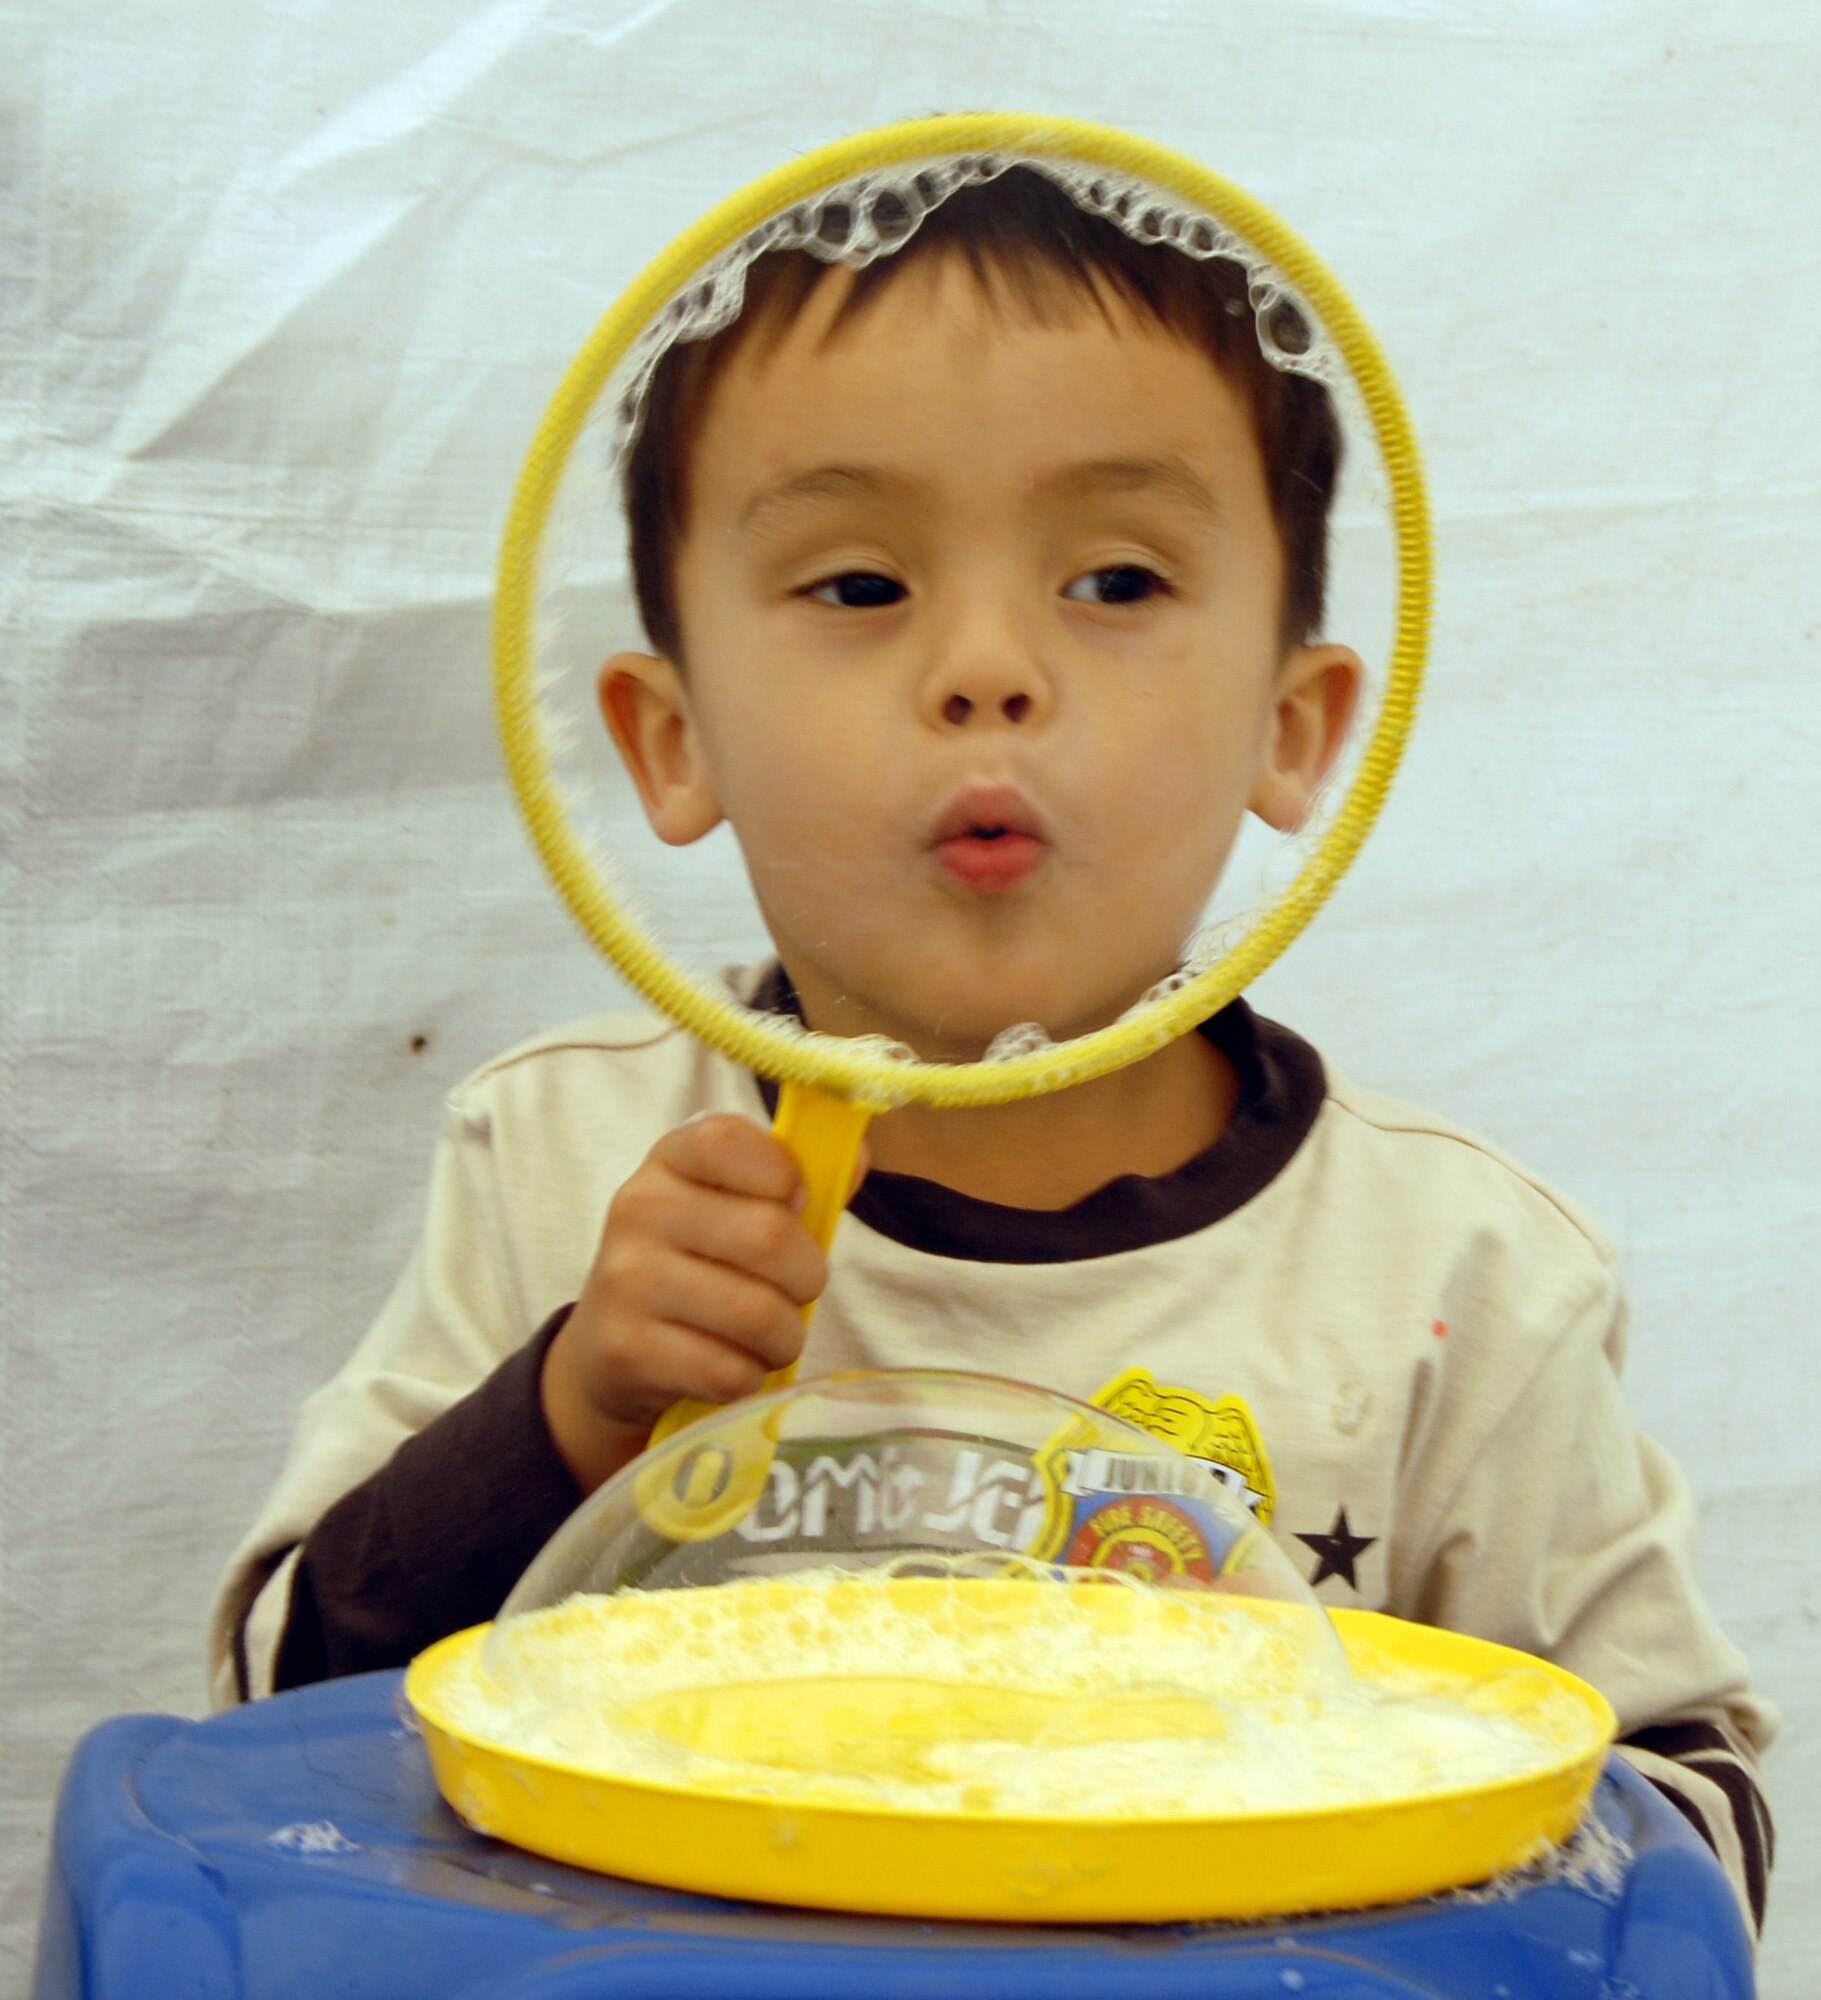 OSAN AIR BASE, Republic of Korea -- Andrew Wheeler, the 3-year-old son of 1Lt Richard Wheeler, 7AF, blows bubbles during the Korean/American Friendship Festival on Oct. 15, 2007 (U.S. Air Force photo by Staff Sgt. Ronnie Hill) (Released)